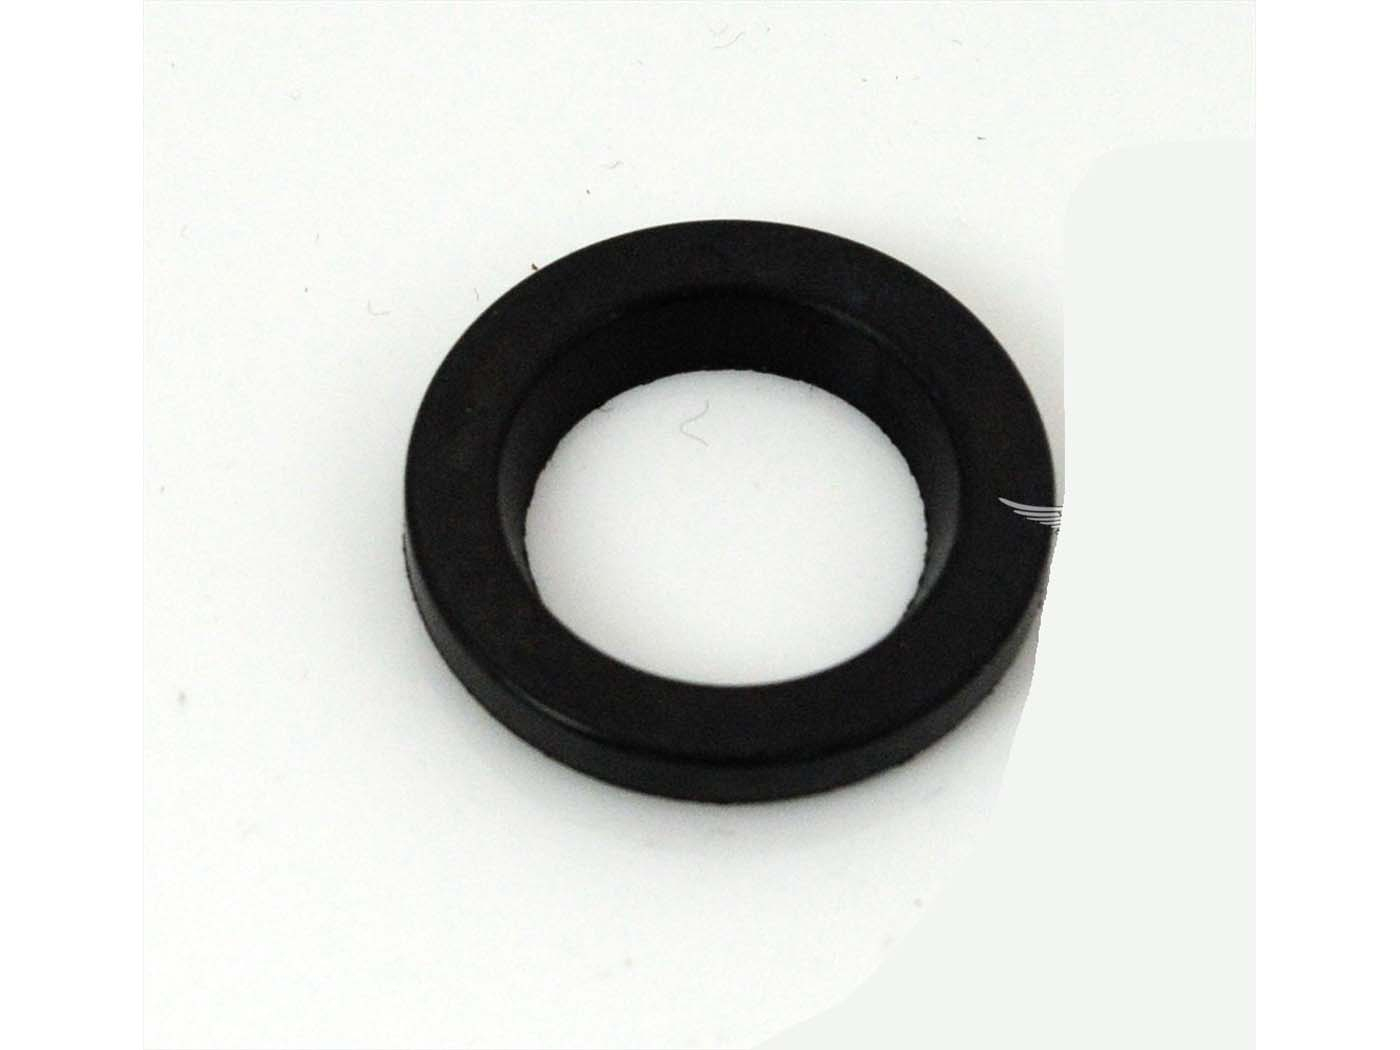 Engine Clutch Lever Seal For Hercules DKW Sachs Engine 50/3 50/4